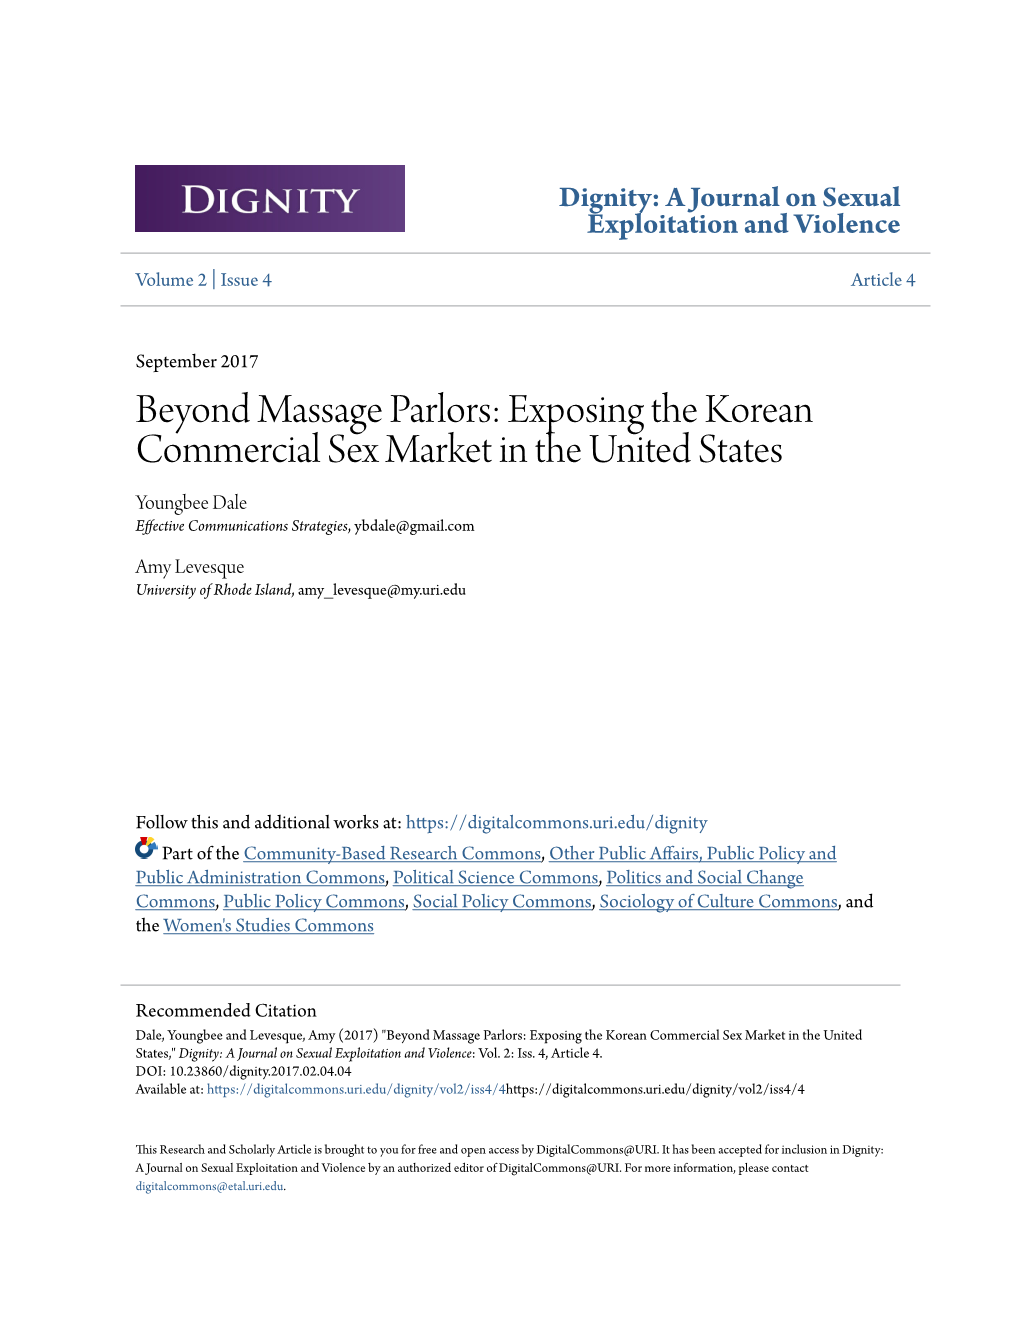 Beyond Massage Parlors: Exposing the Korean Commercial Sex Market in the United States Youngbee Dale Effective Communications Strategies, Ybdale@Gmail.Com